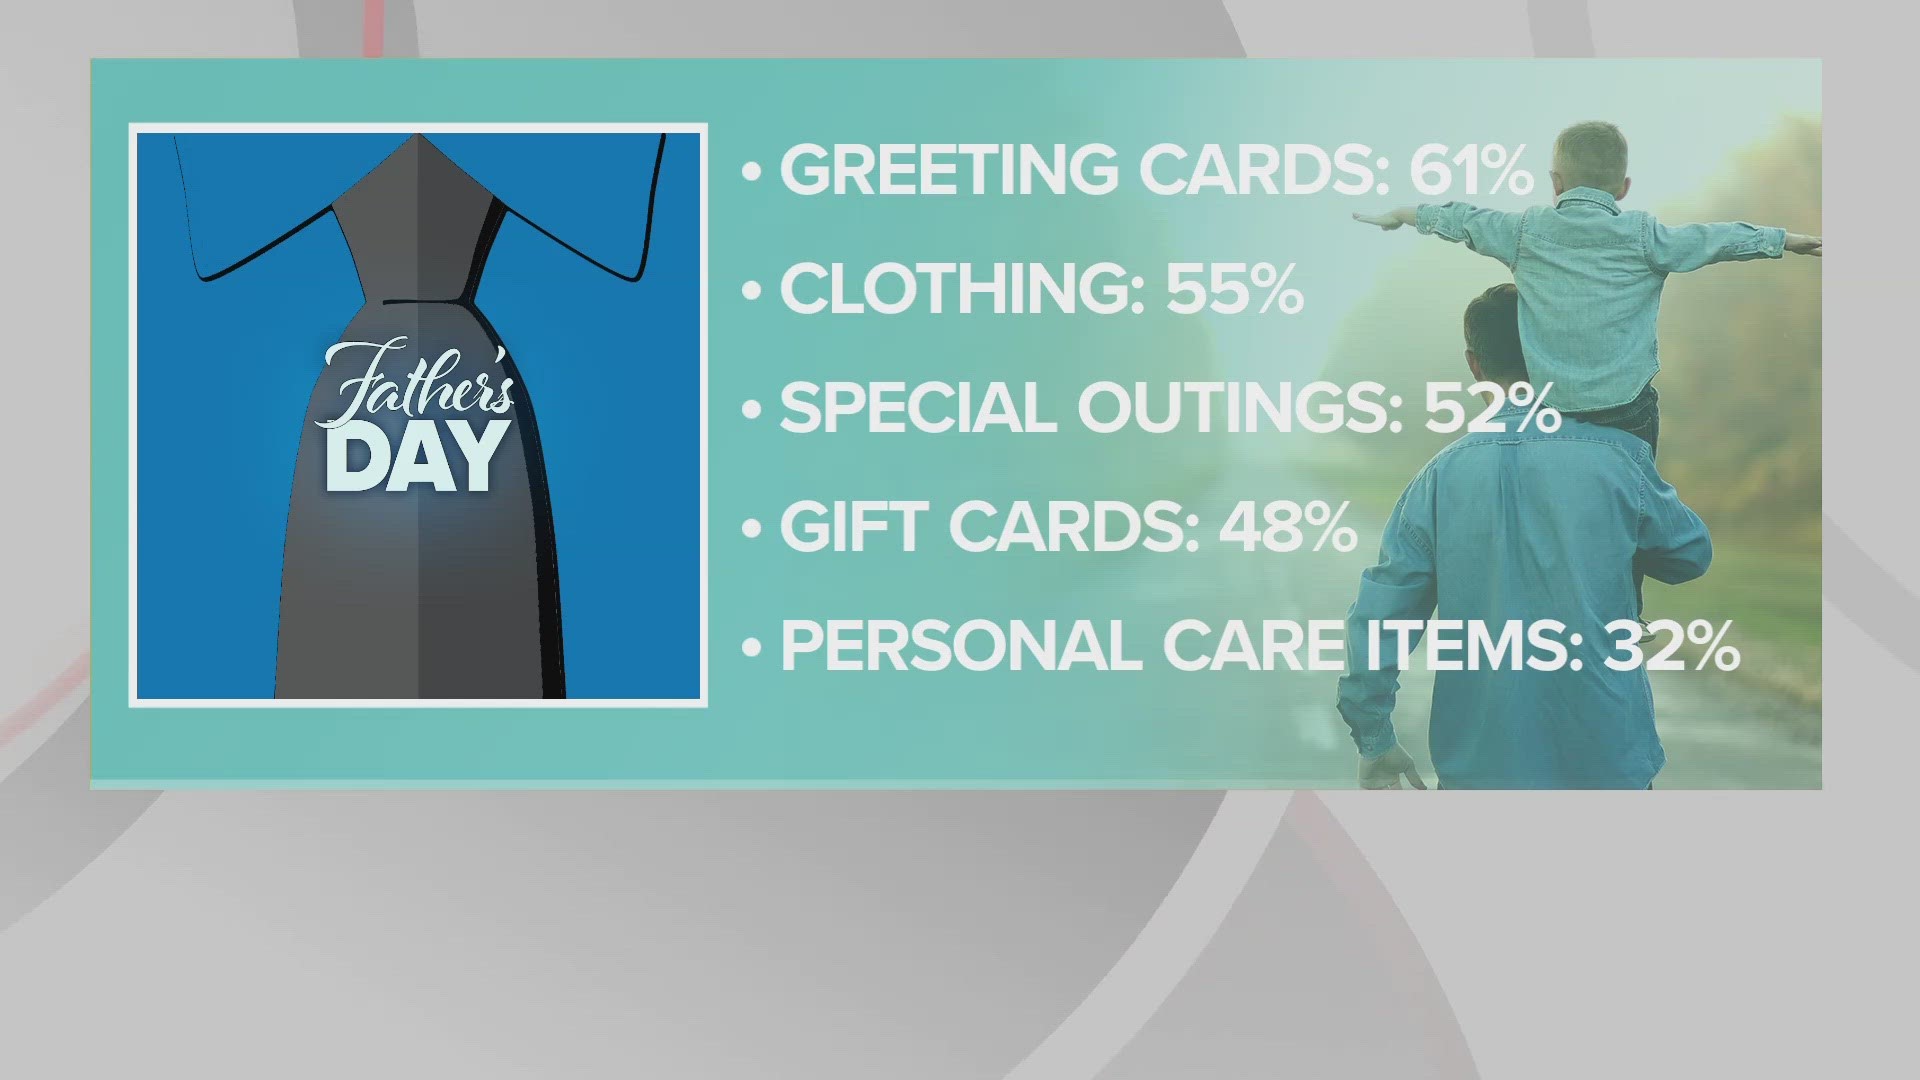 The average person is expected to spend nearly $200 this Father's Day.